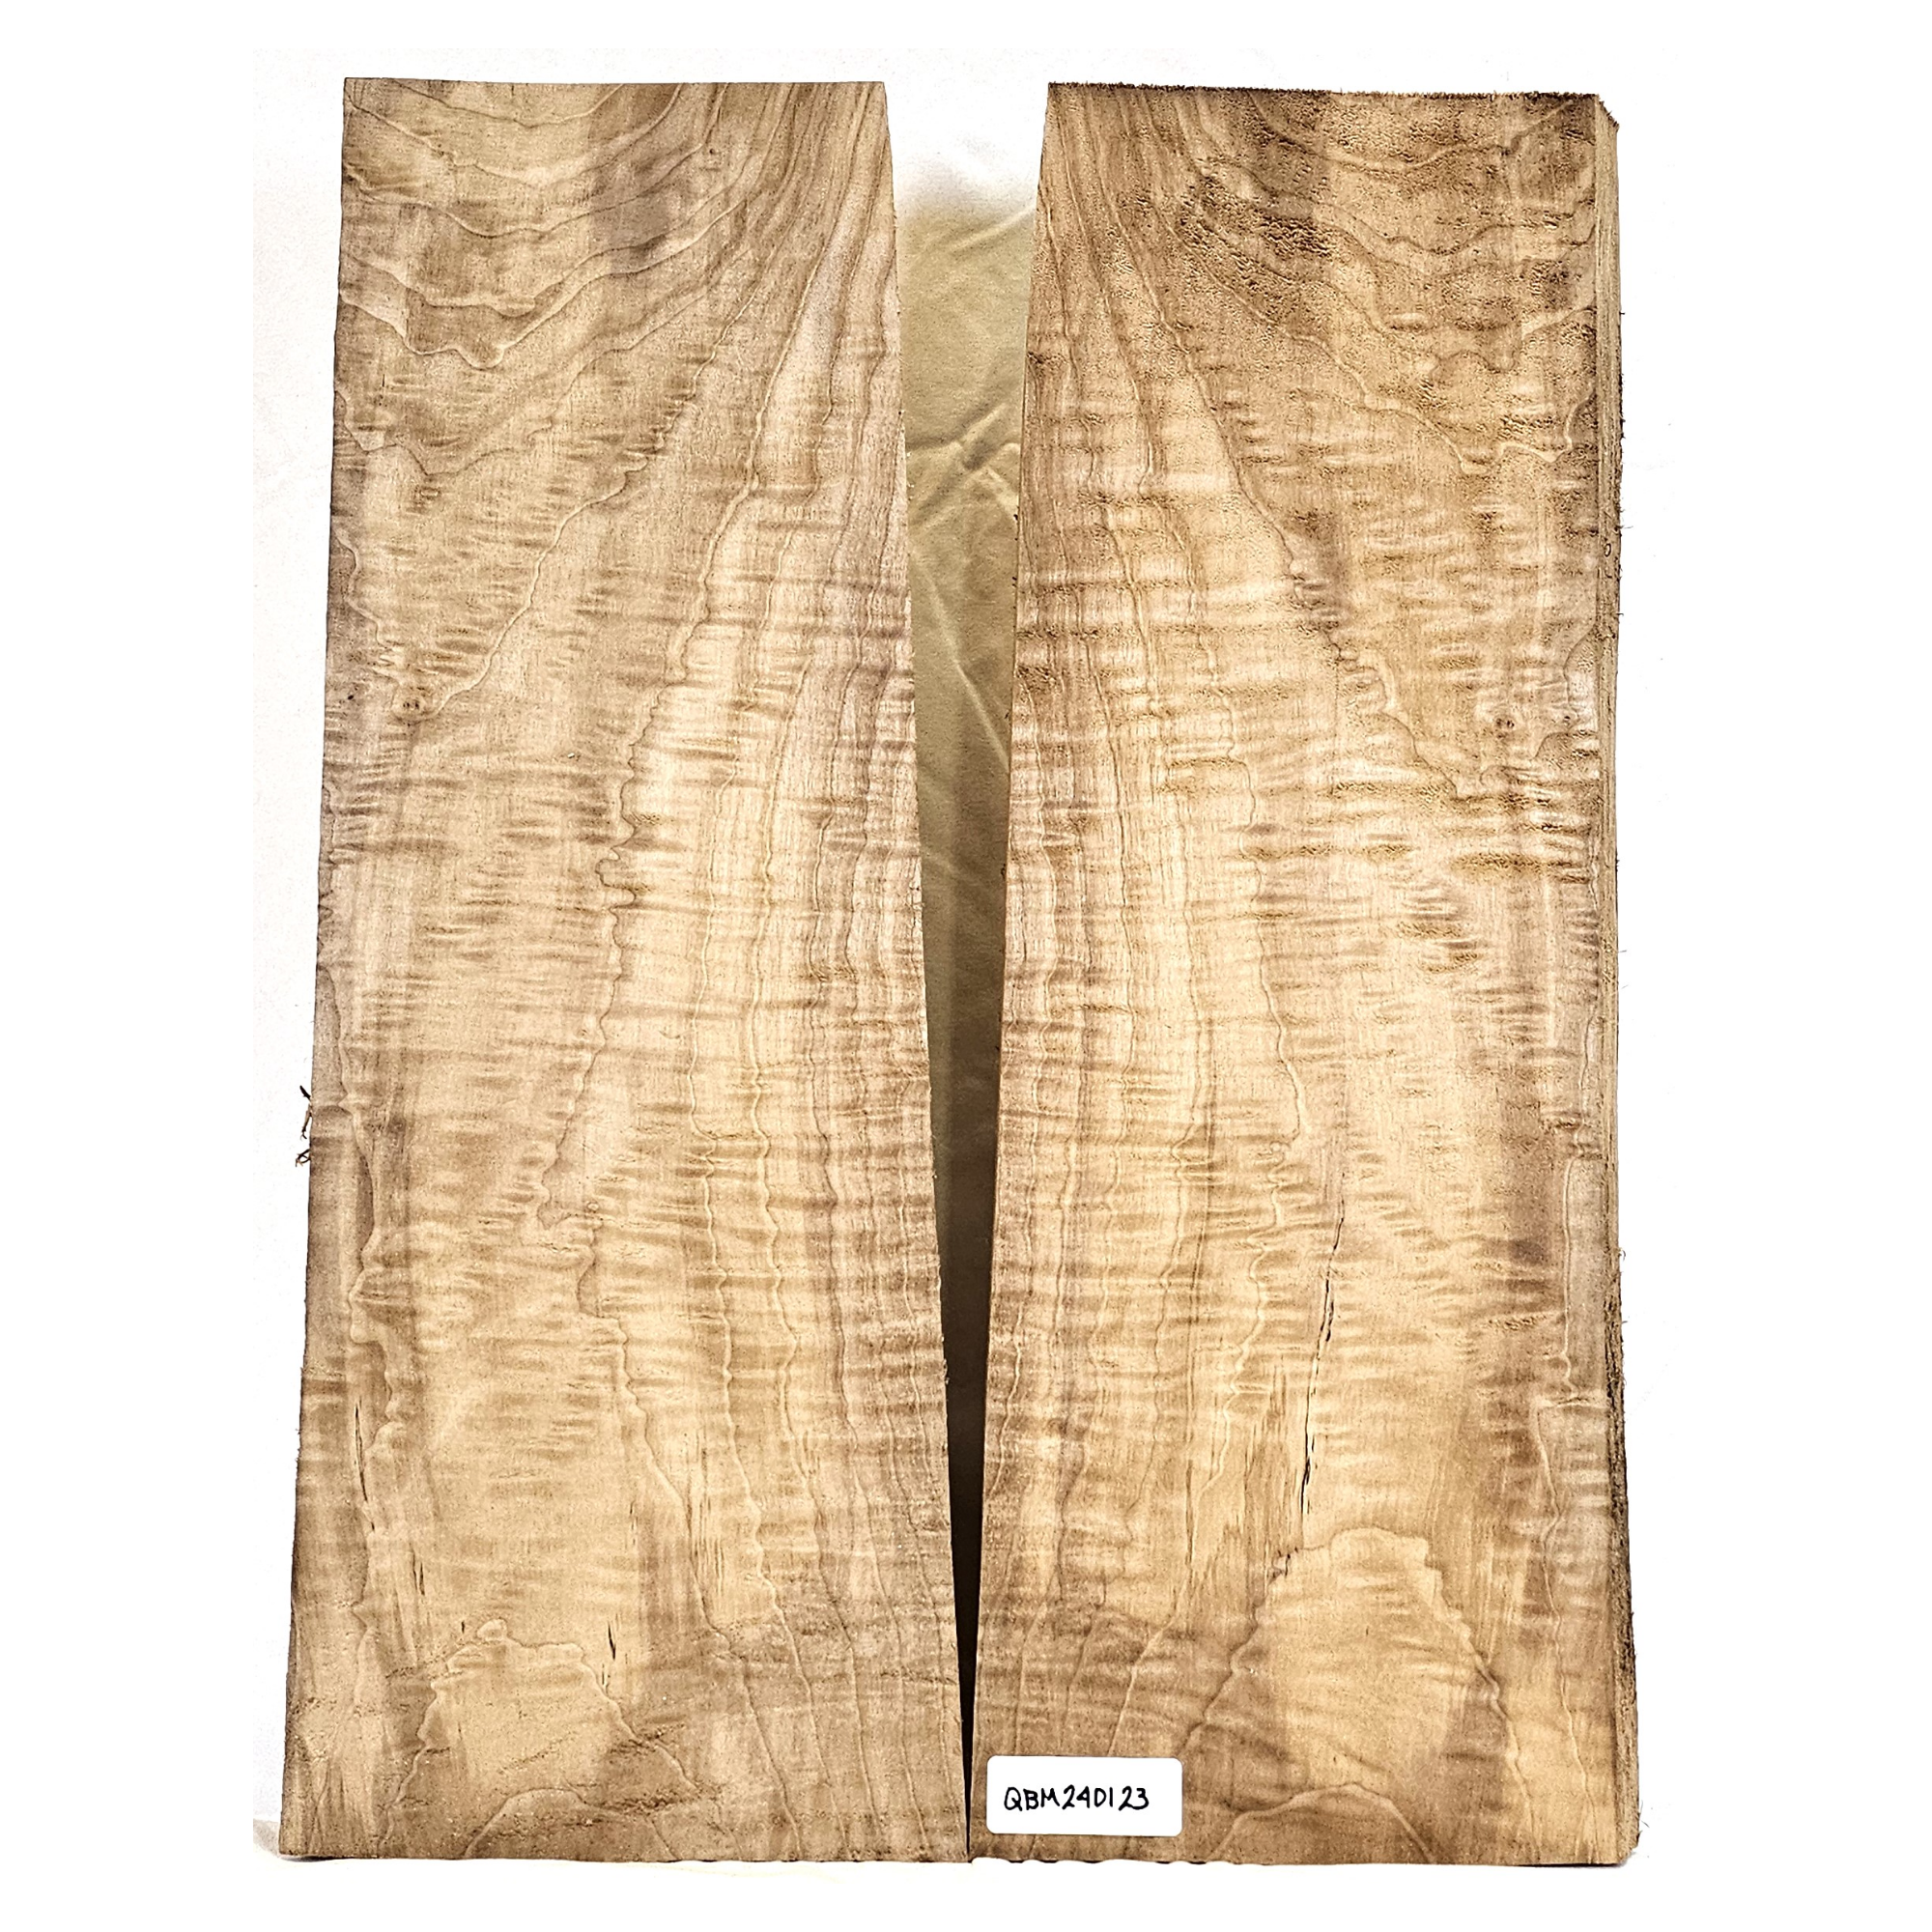 Quilted maple 2-piece set with 4A grade angel-step figure, interesting color variations, and light green streak.